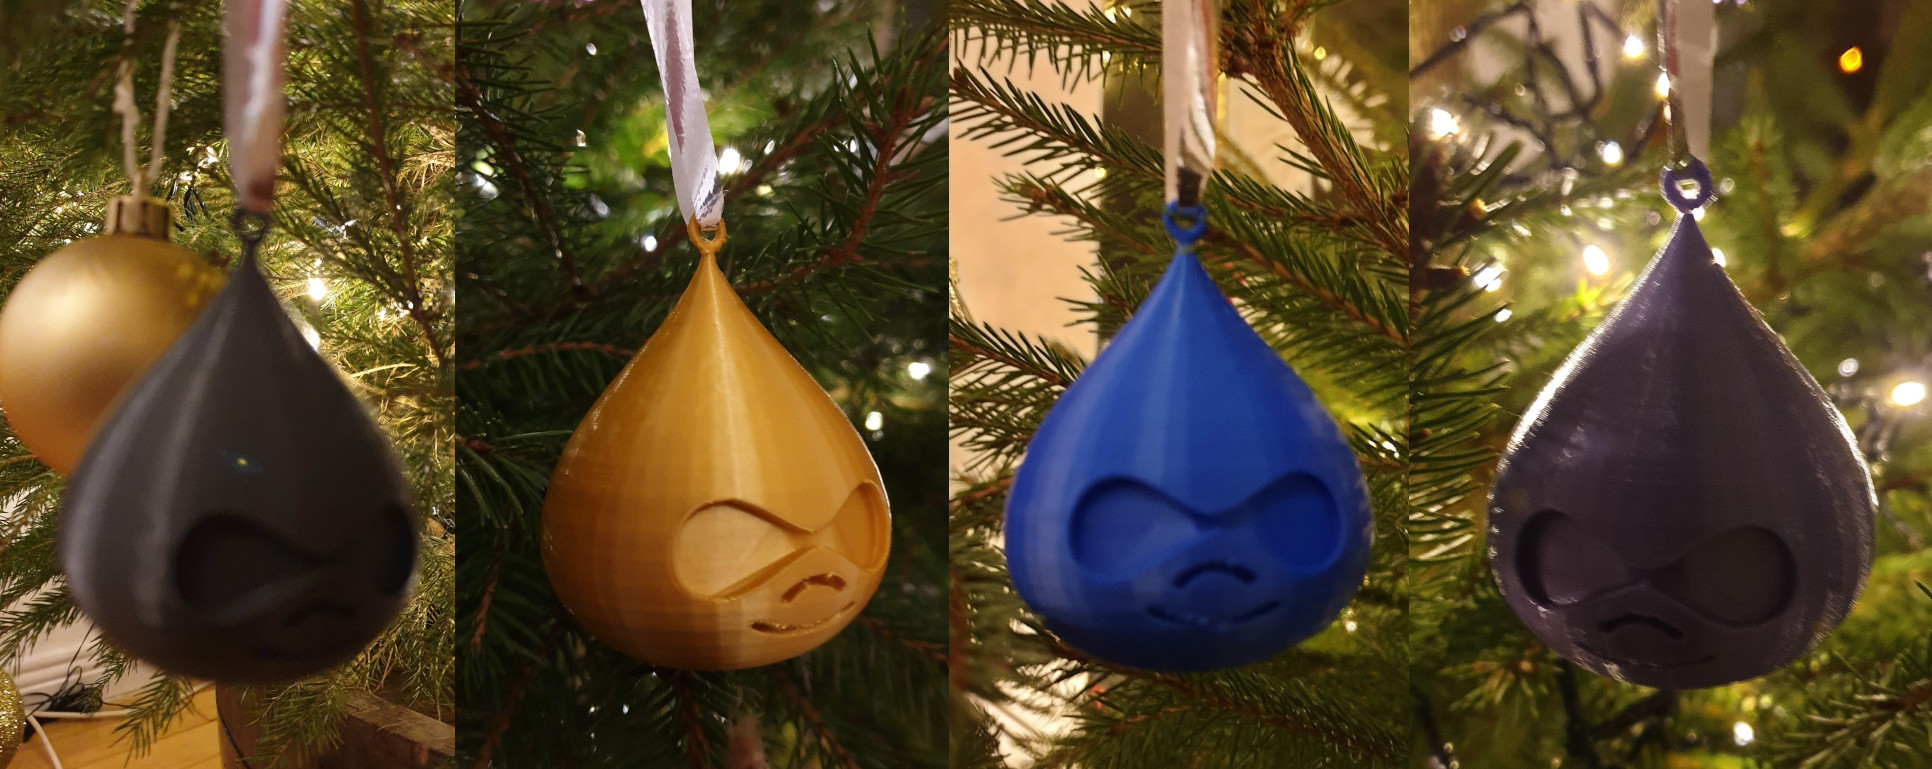 The baubles hanging from our tree